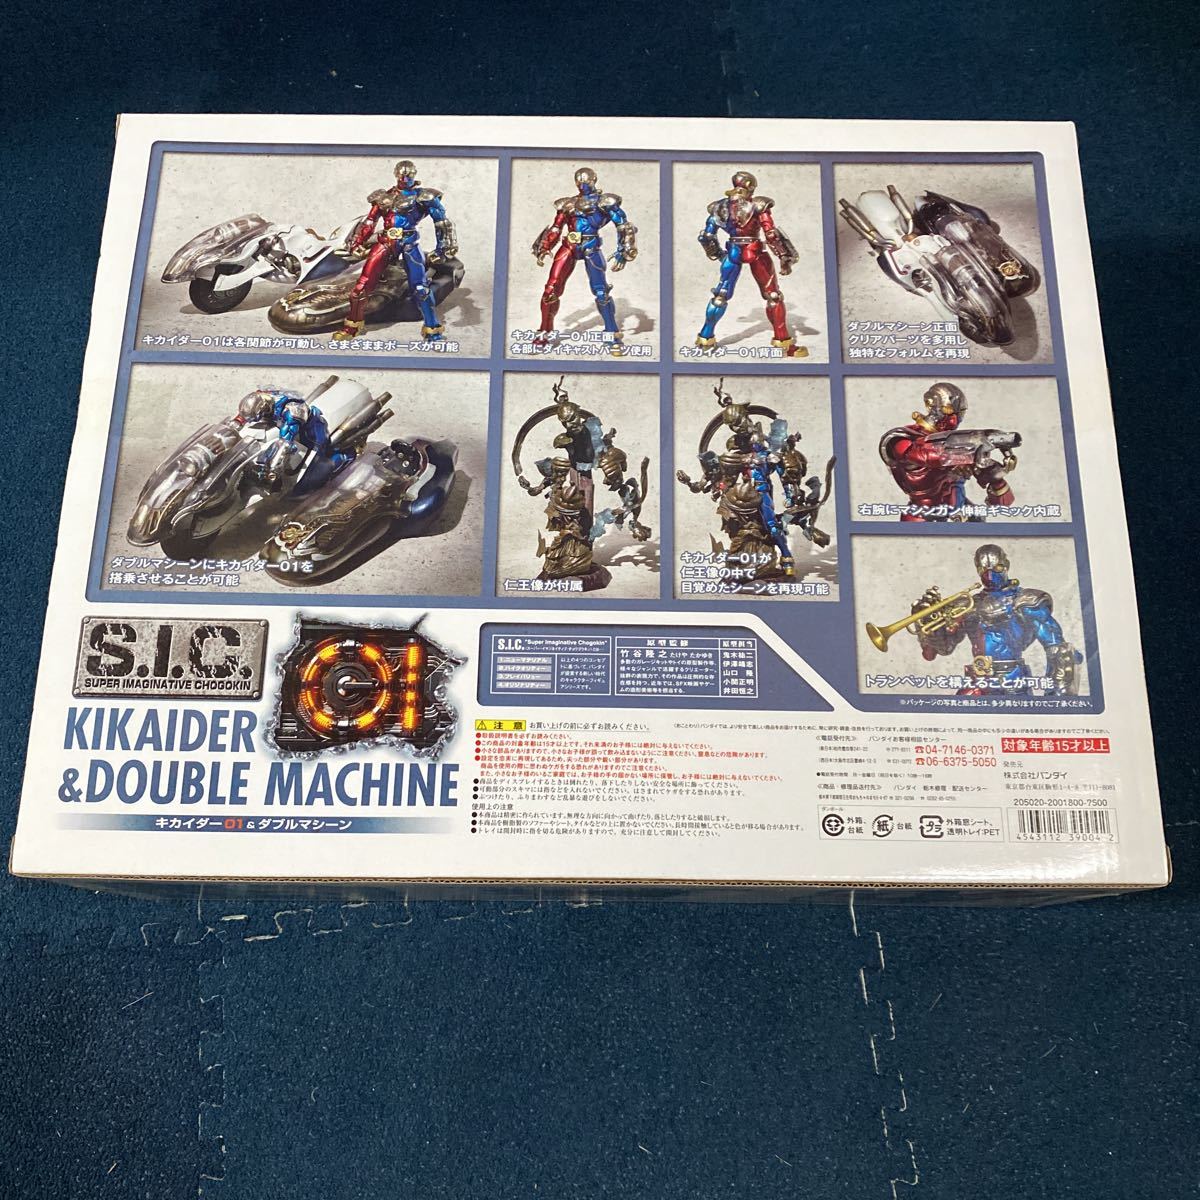 6000 start ultra rare * unopened, unused * S.I.C.VOL.38 Kikaider 01& double machine that time thing that time thing rare rare Vintage toy 